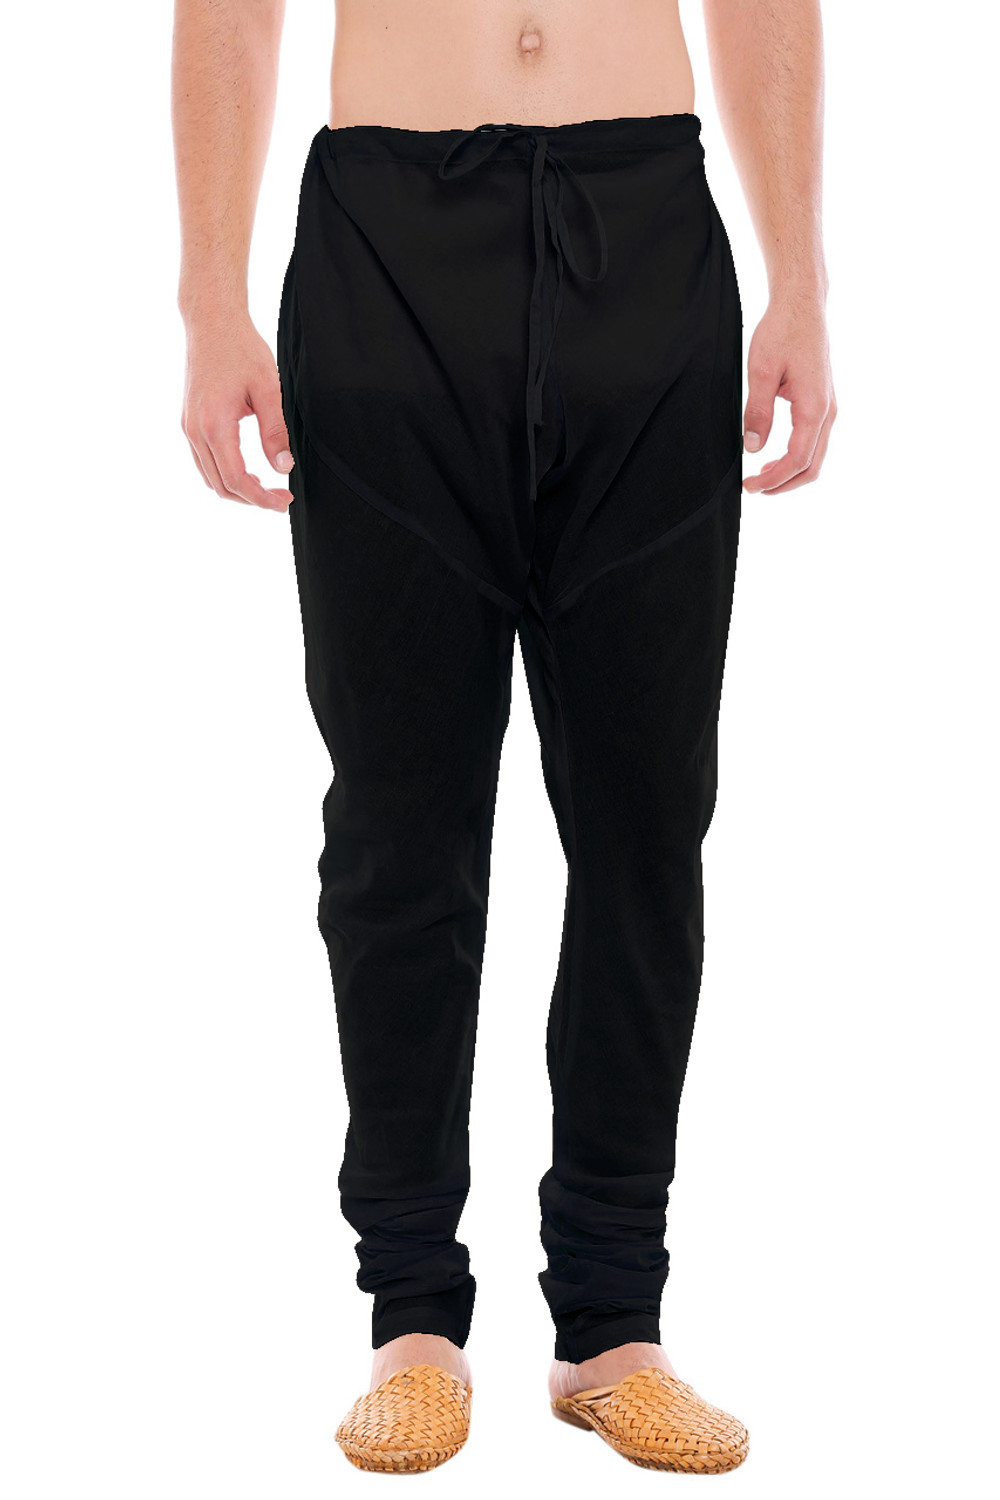 In-Sattva Men's Traditional Indian Style Pure Cotton Solid Churidaar Pants  Black